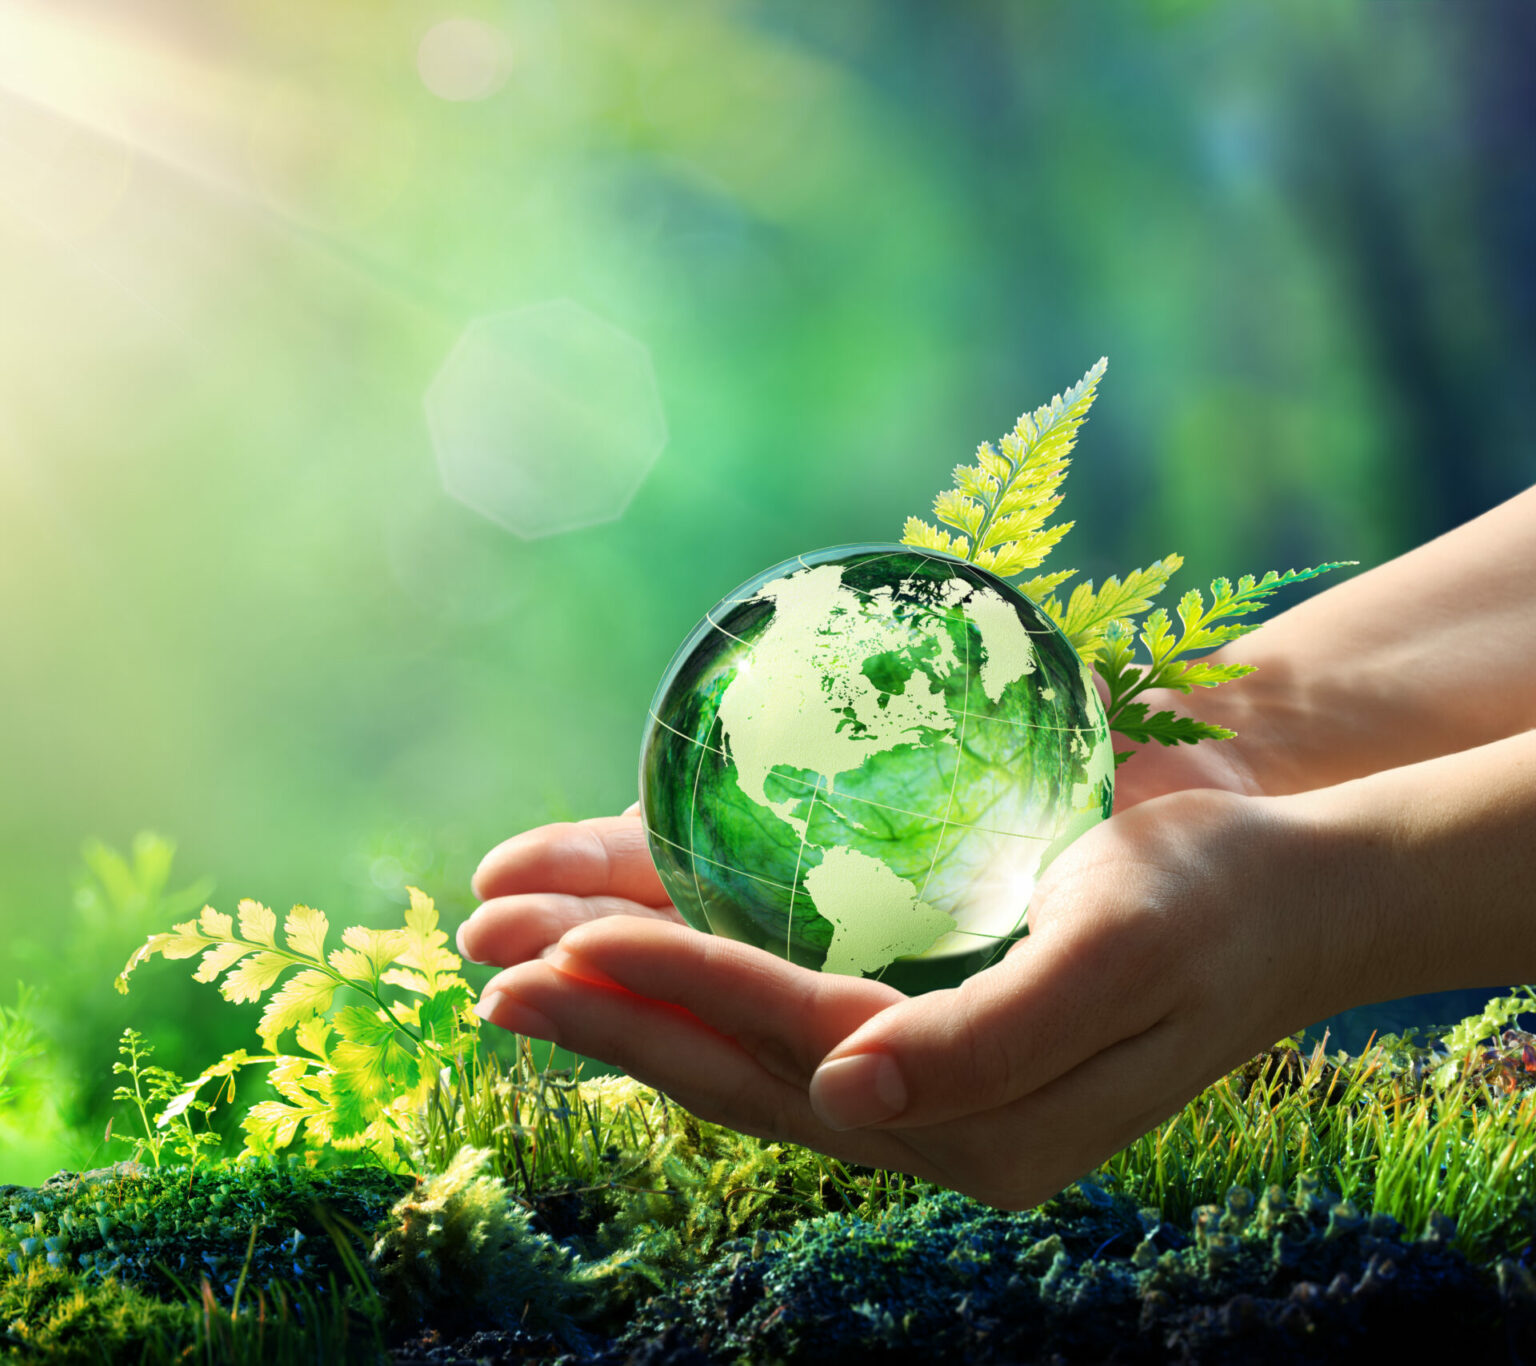 Hands holding green globe in green environment